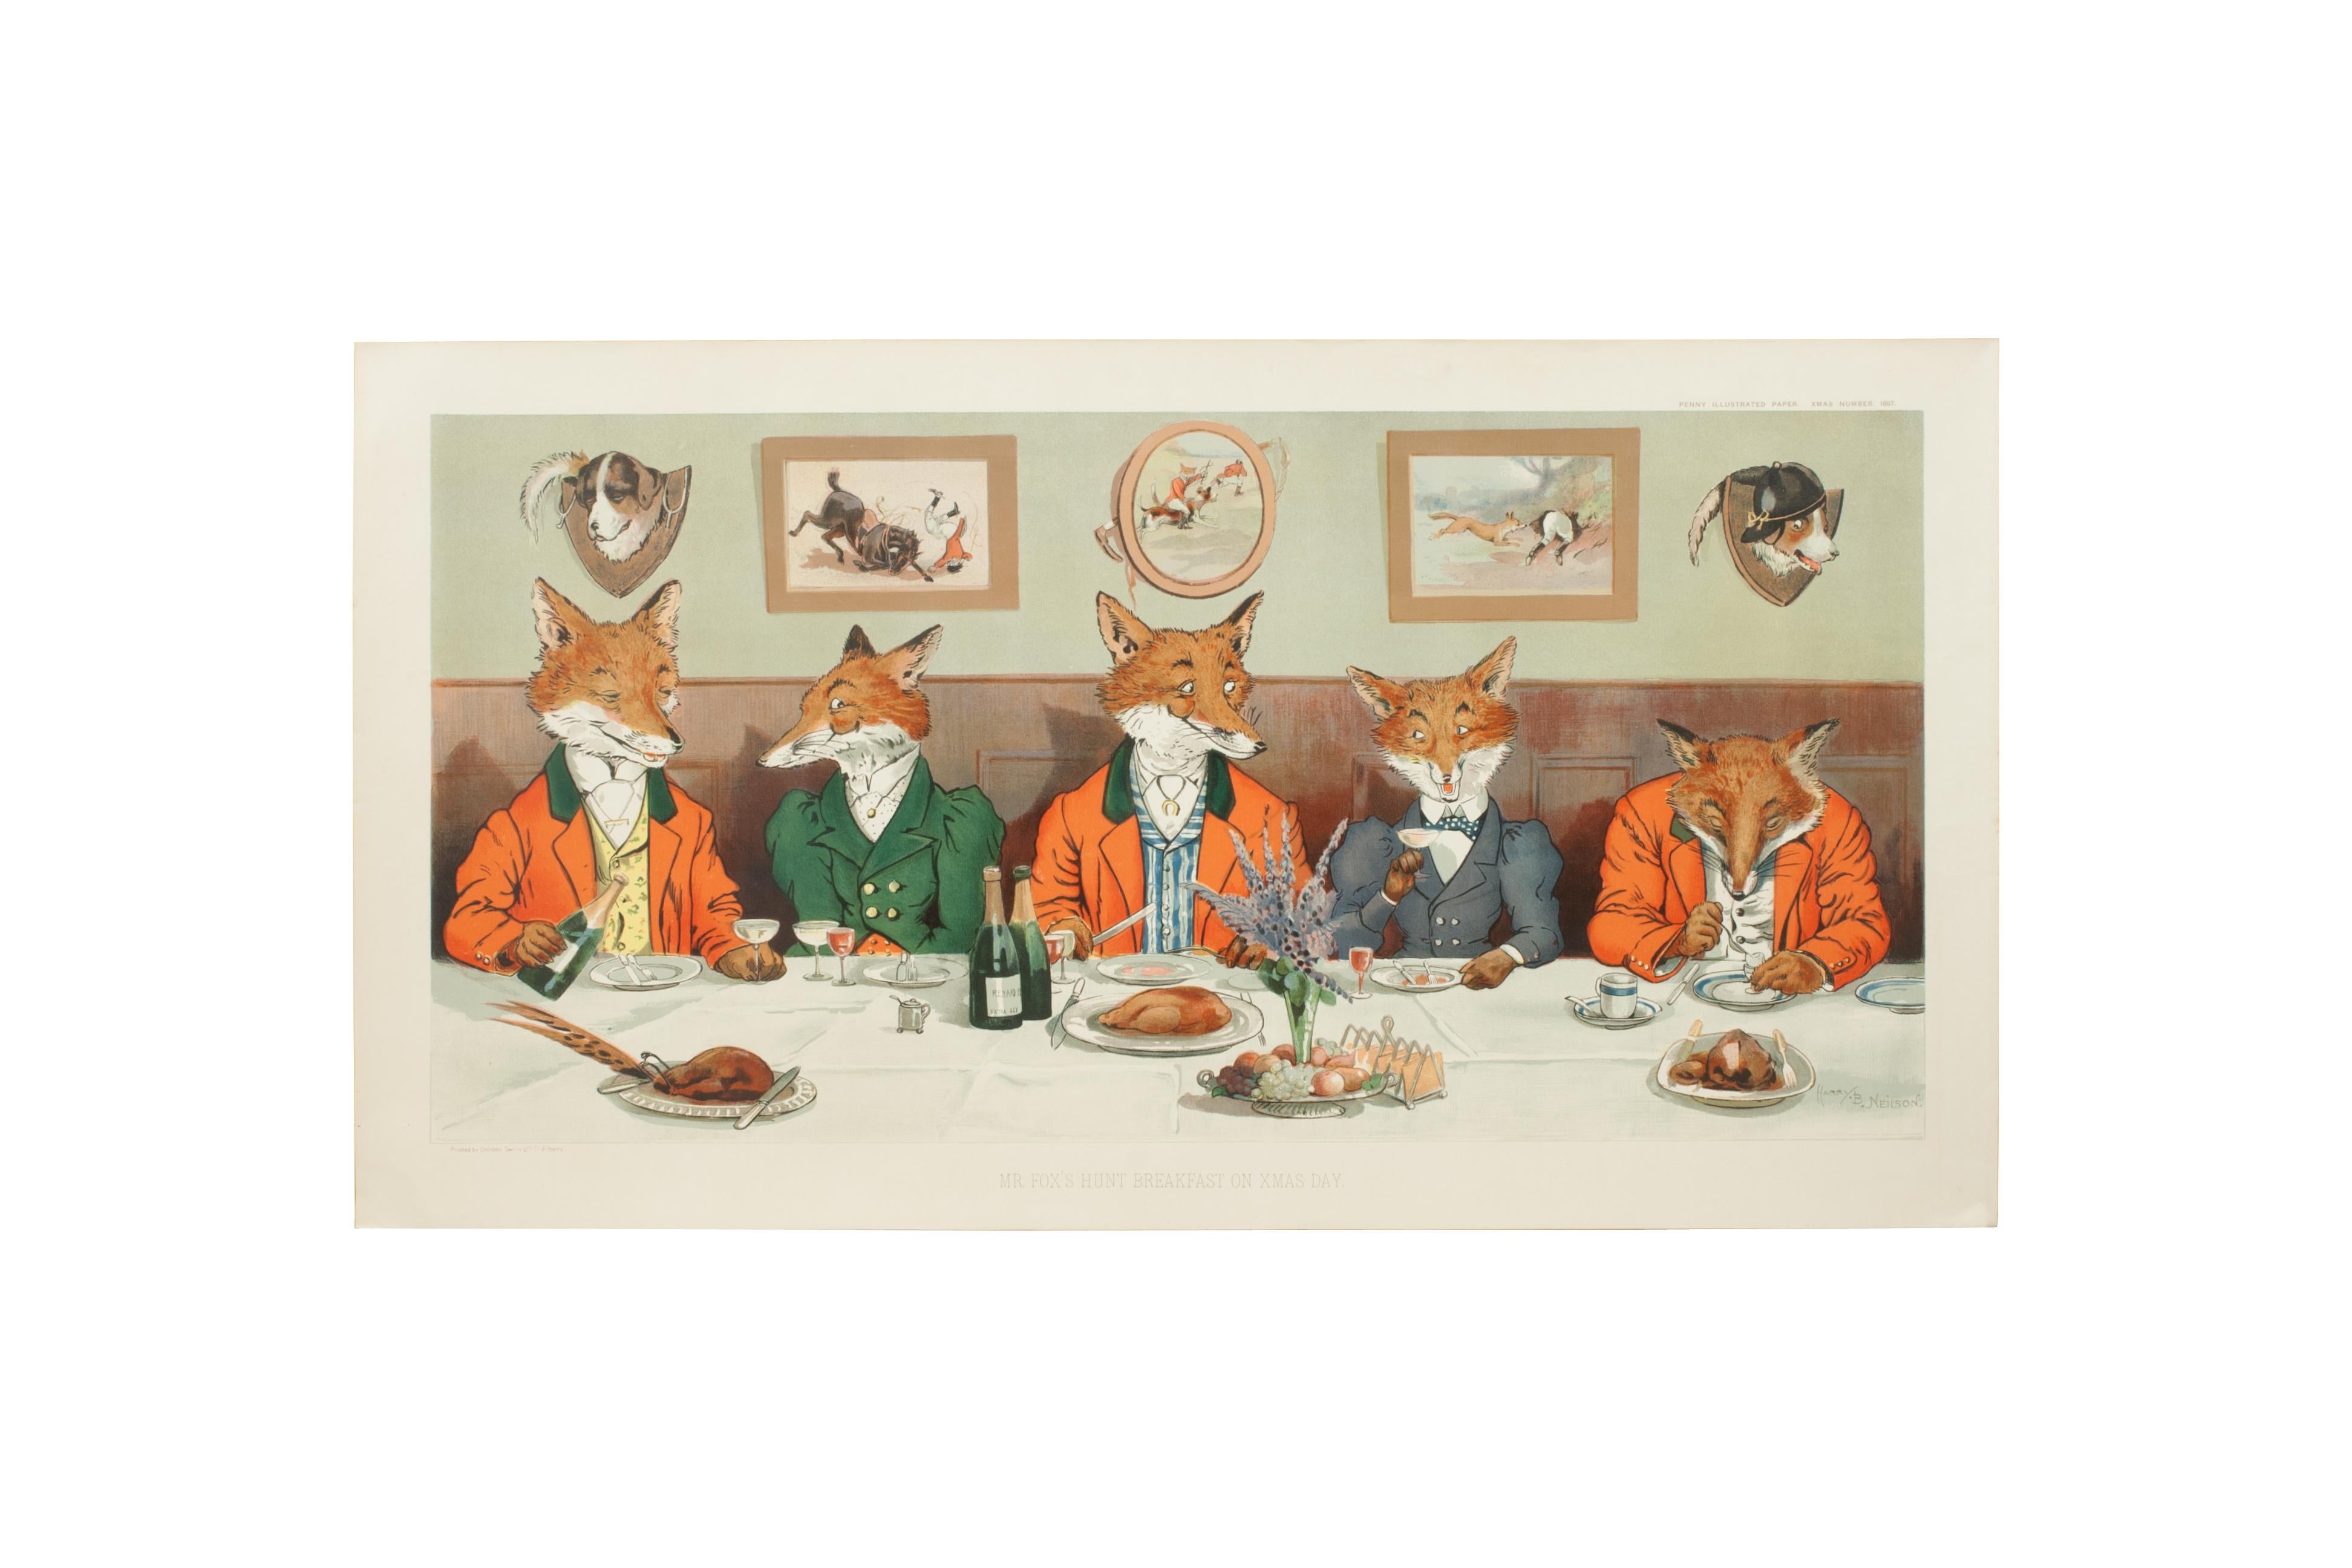 Vintage Fox hunting print.
A very colourful original chromolithograph after Harry Neilson, 